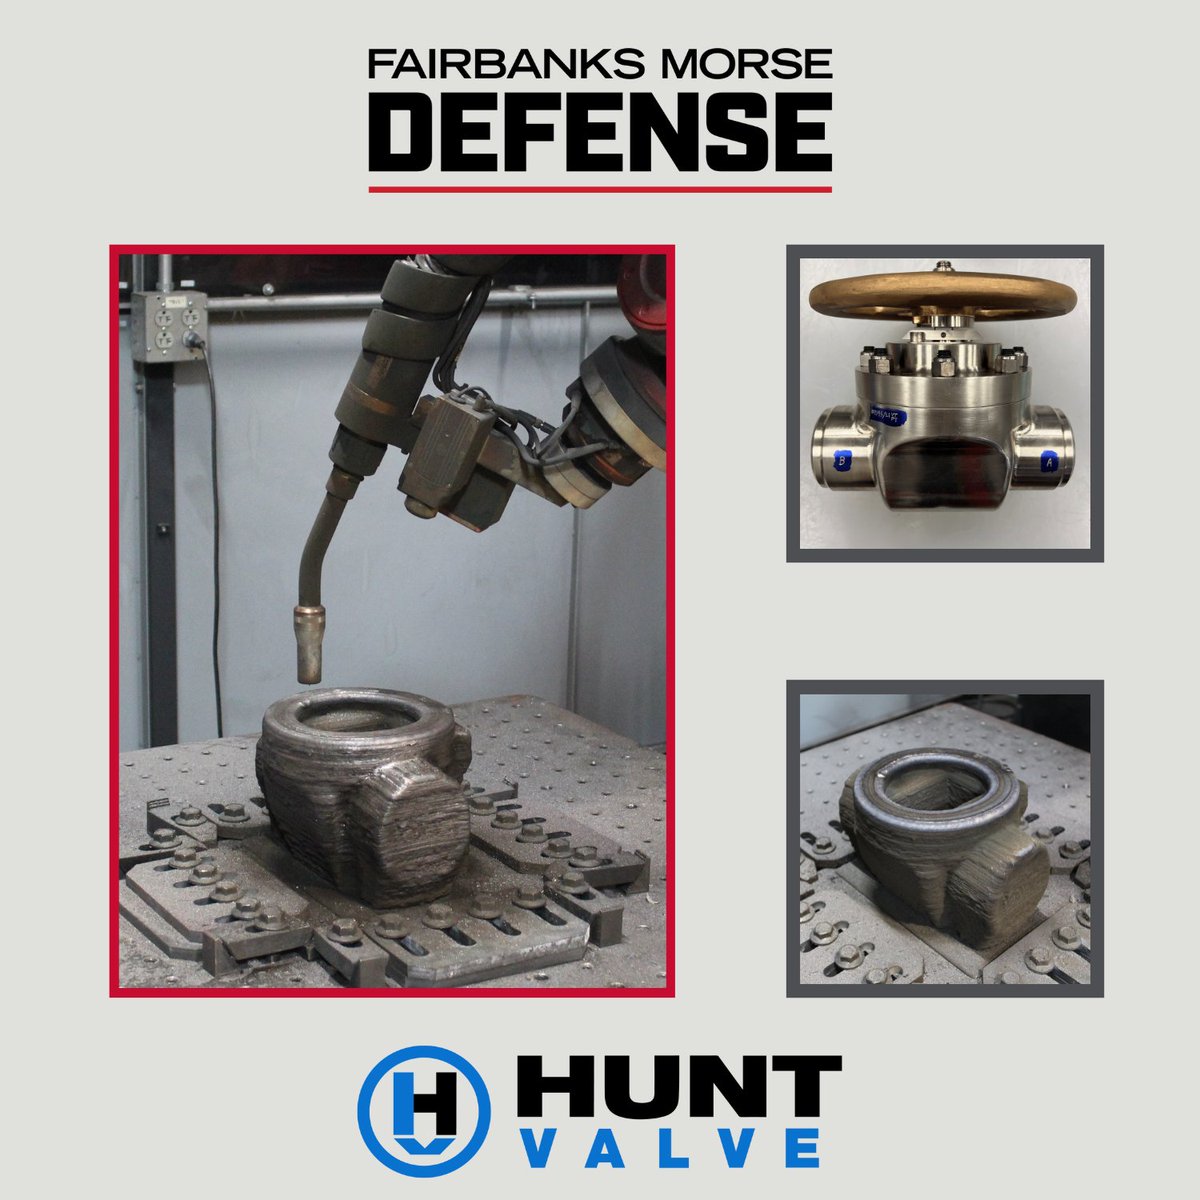 FMD and Hunt Valve has been awarded a contract by the Maritime Sustainment Technology and Innovation Consortium (MSTIC) to produce a 3-D printed valve assembly for installation on U.S. Navy submarines. Click to Learn More: fairbanksmorsedefense.com/blog/fairbanks…